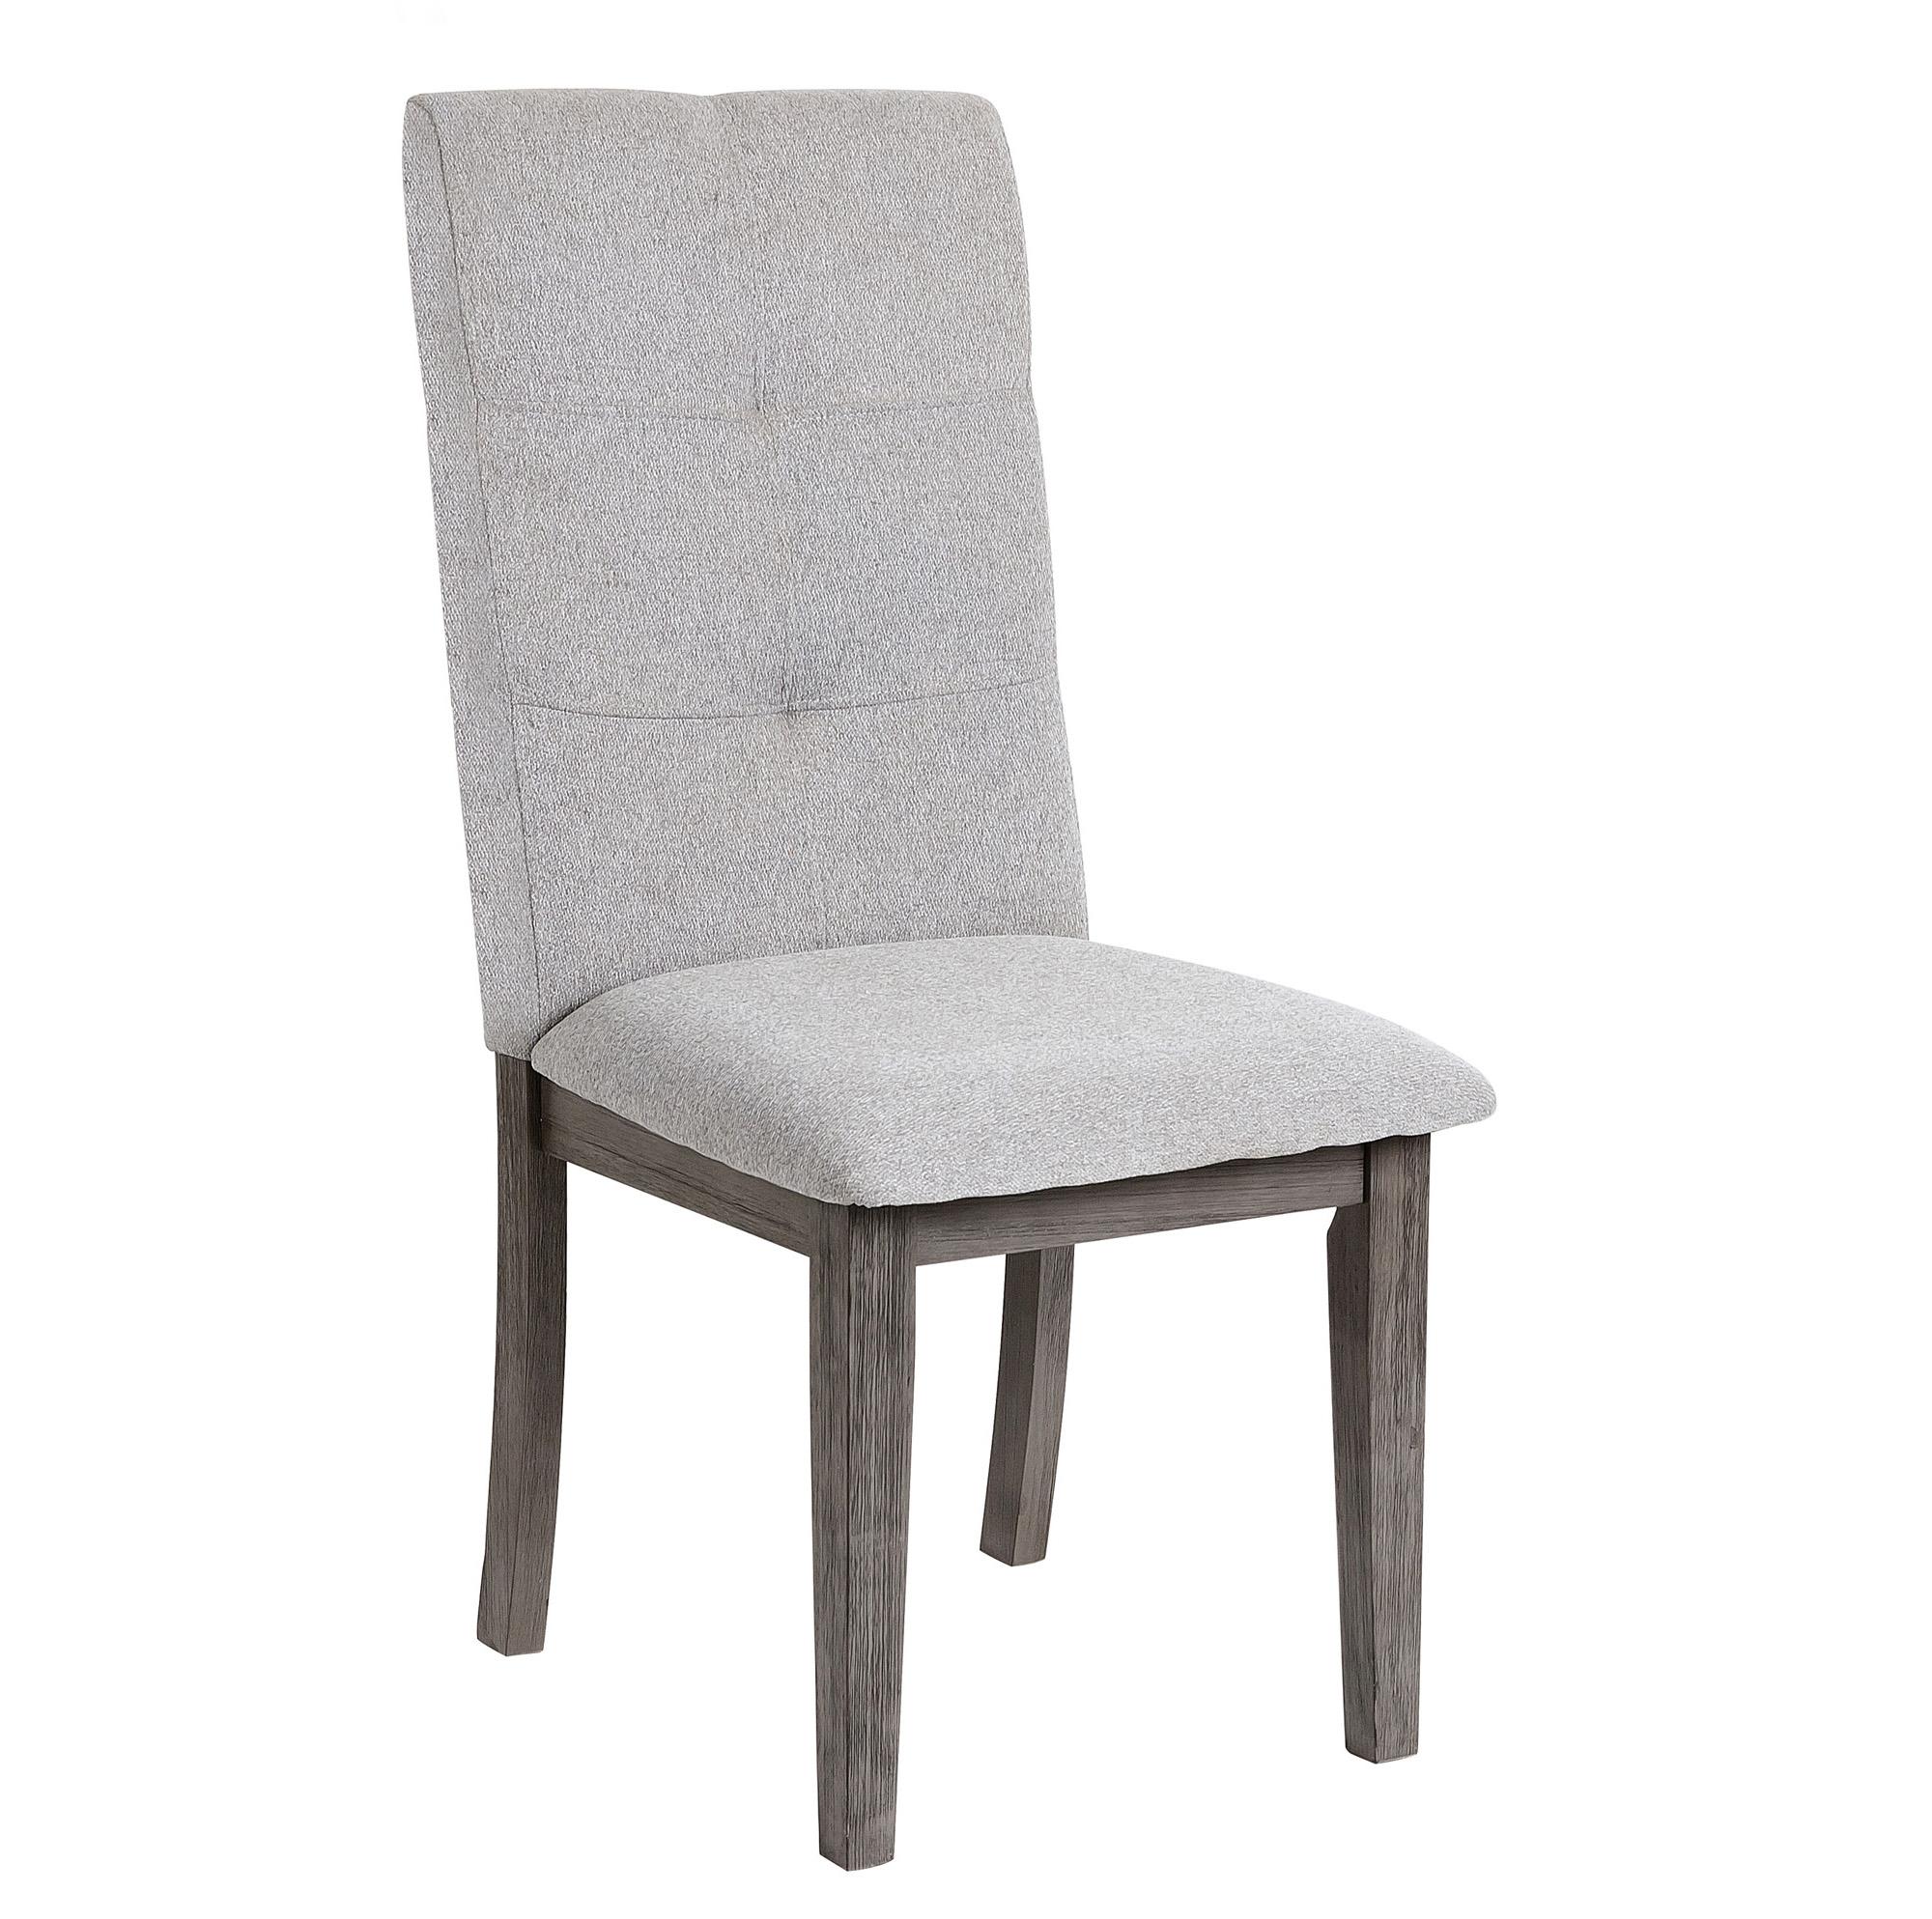 Transitional Side Chair Set 5163S University 5163S in Gray Polyester